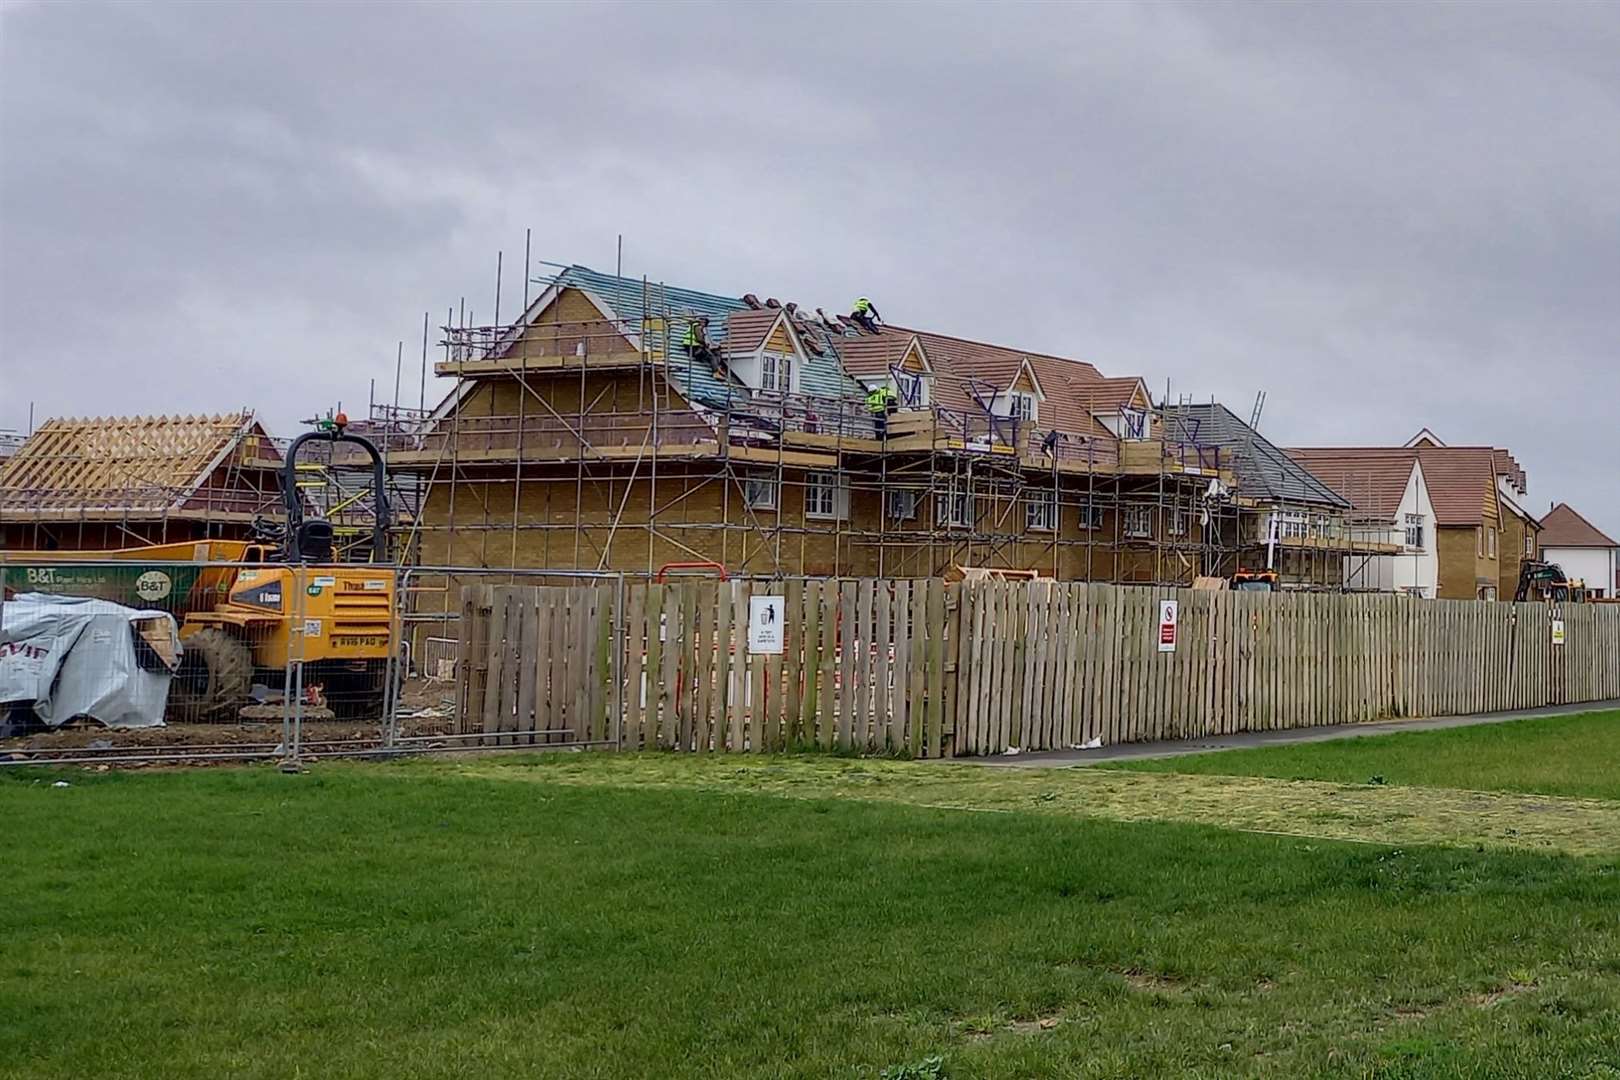 A further 59 homes are poised to be added to the development